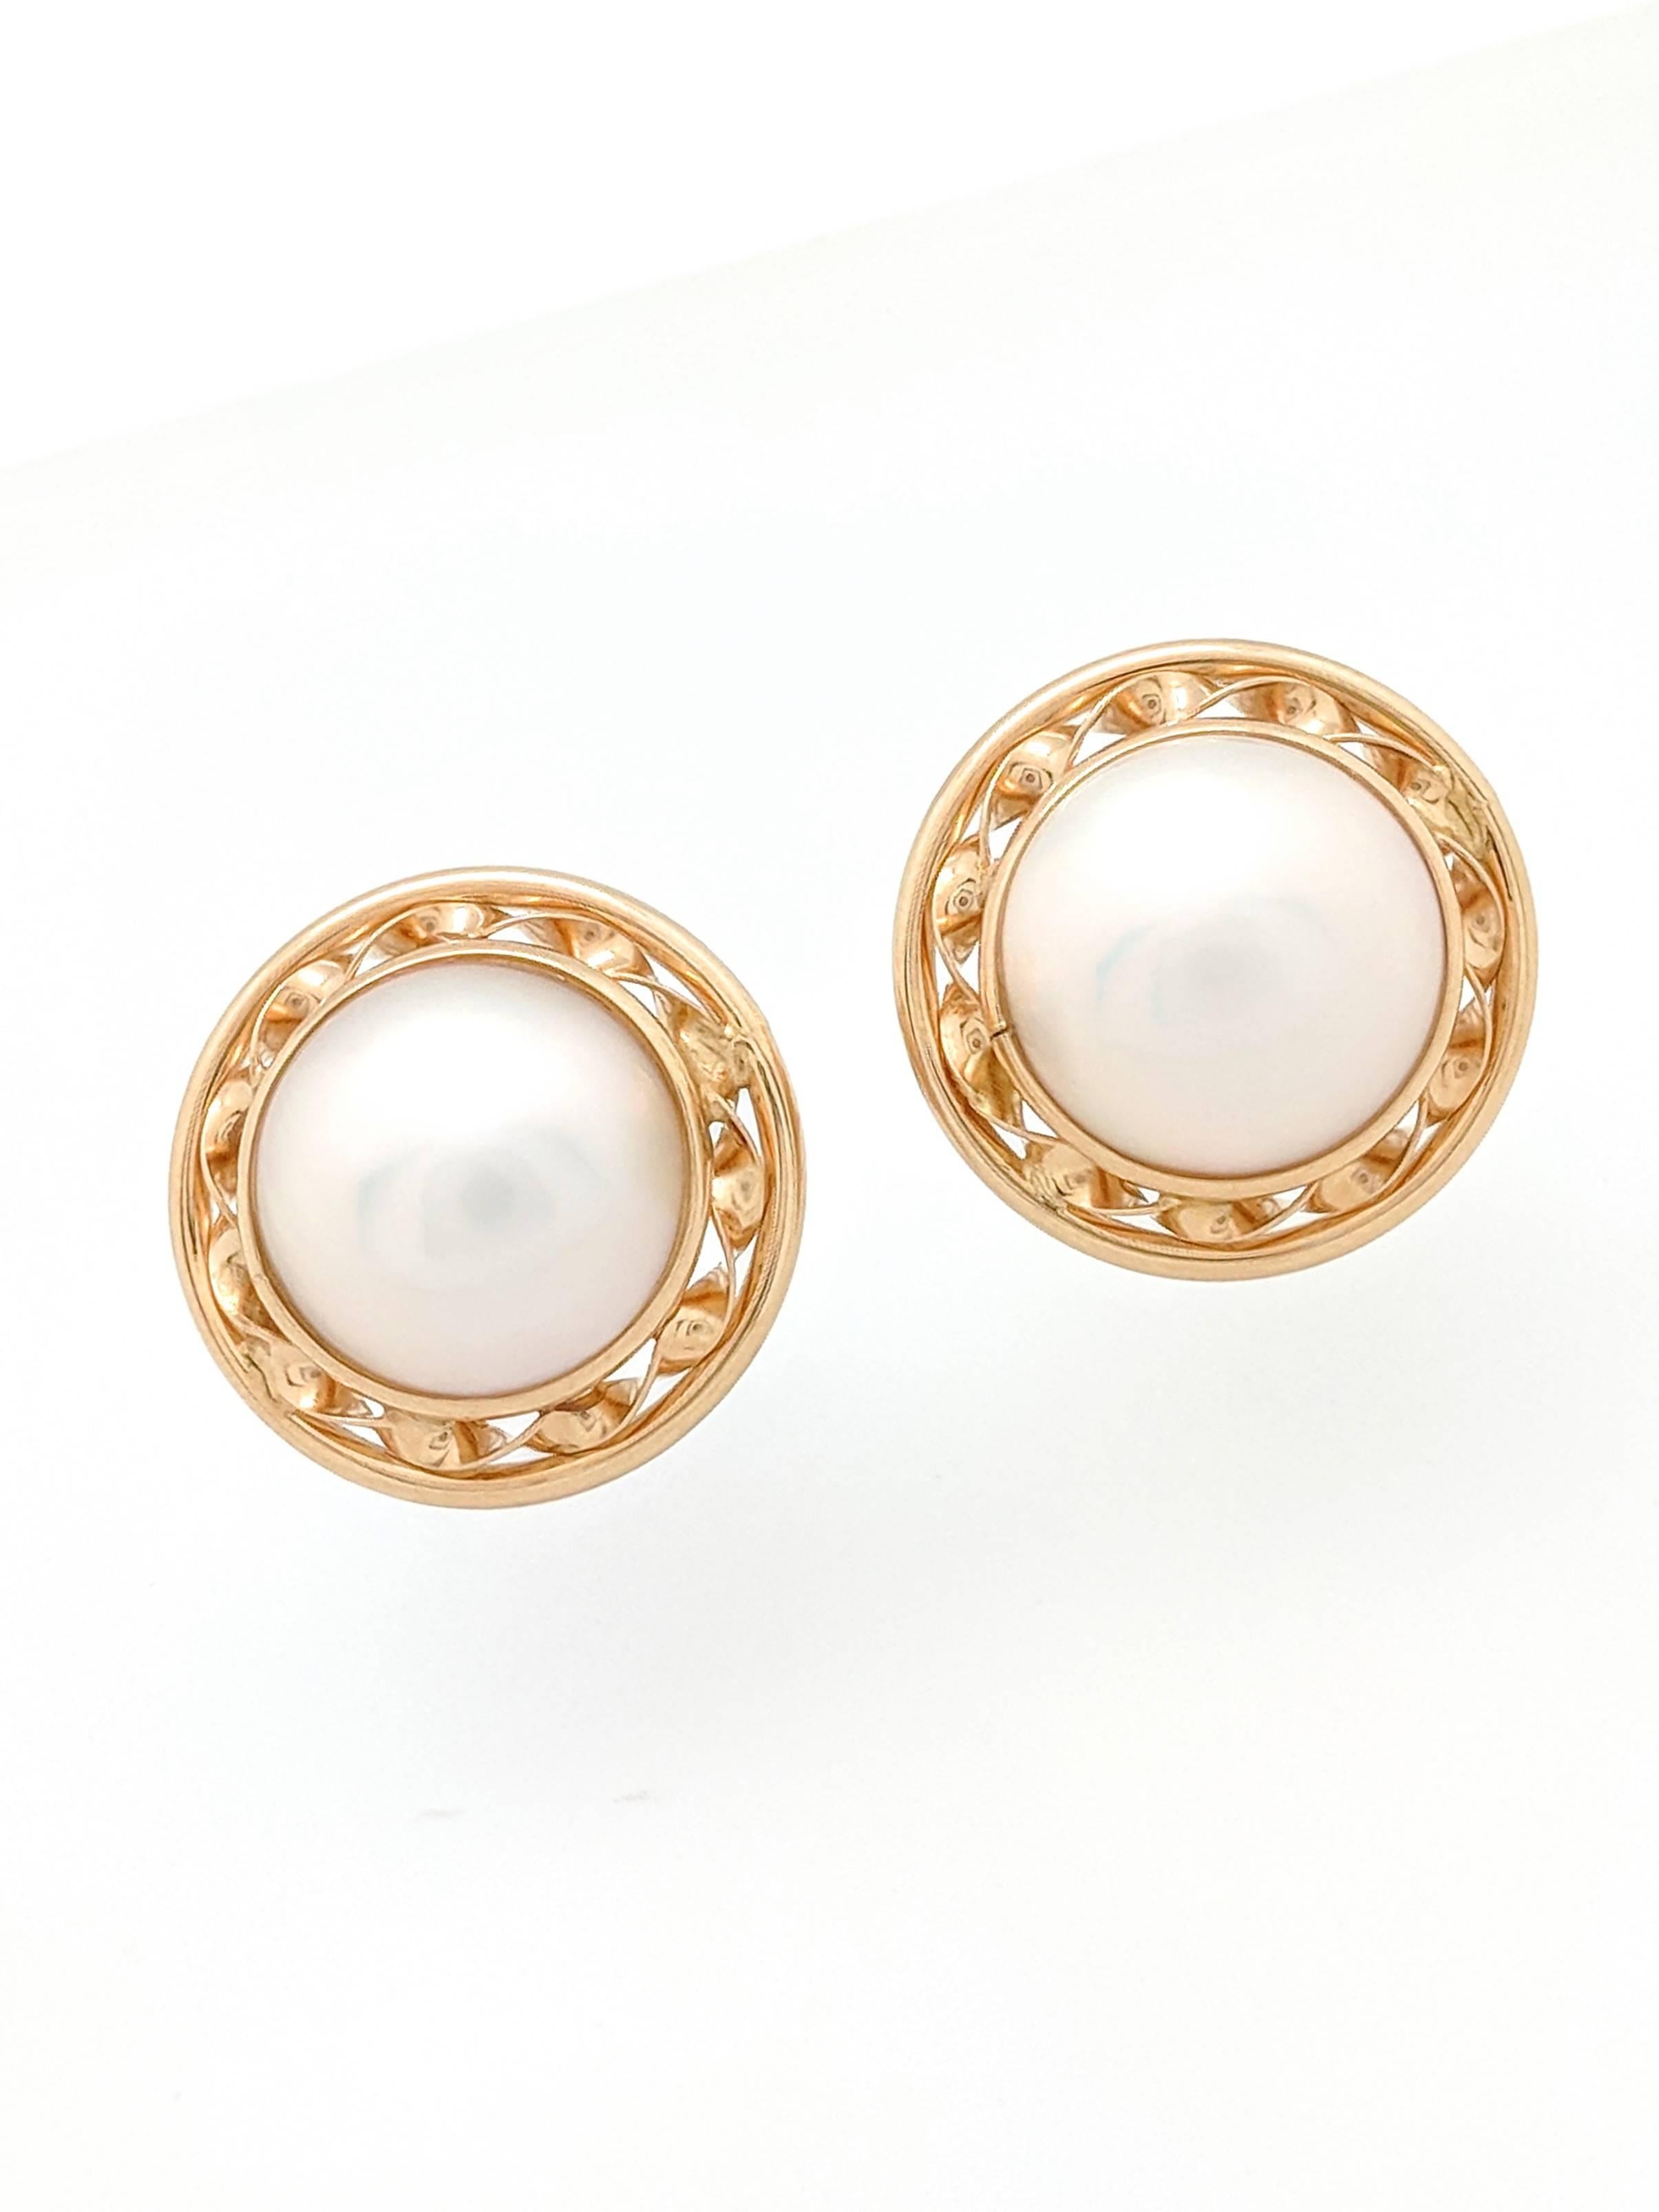 Ladies 14k Yellow Gold 13mm Mabe Pearl Earrings

You are viewing a beautiful pair of 13mm Mabe Pearl Earrings. These earrings are crafted from 14k yellow gold and weigh 7.5 grams. Each earring features (1) 13mm Mabe Pearl. The earrings measure 20mm